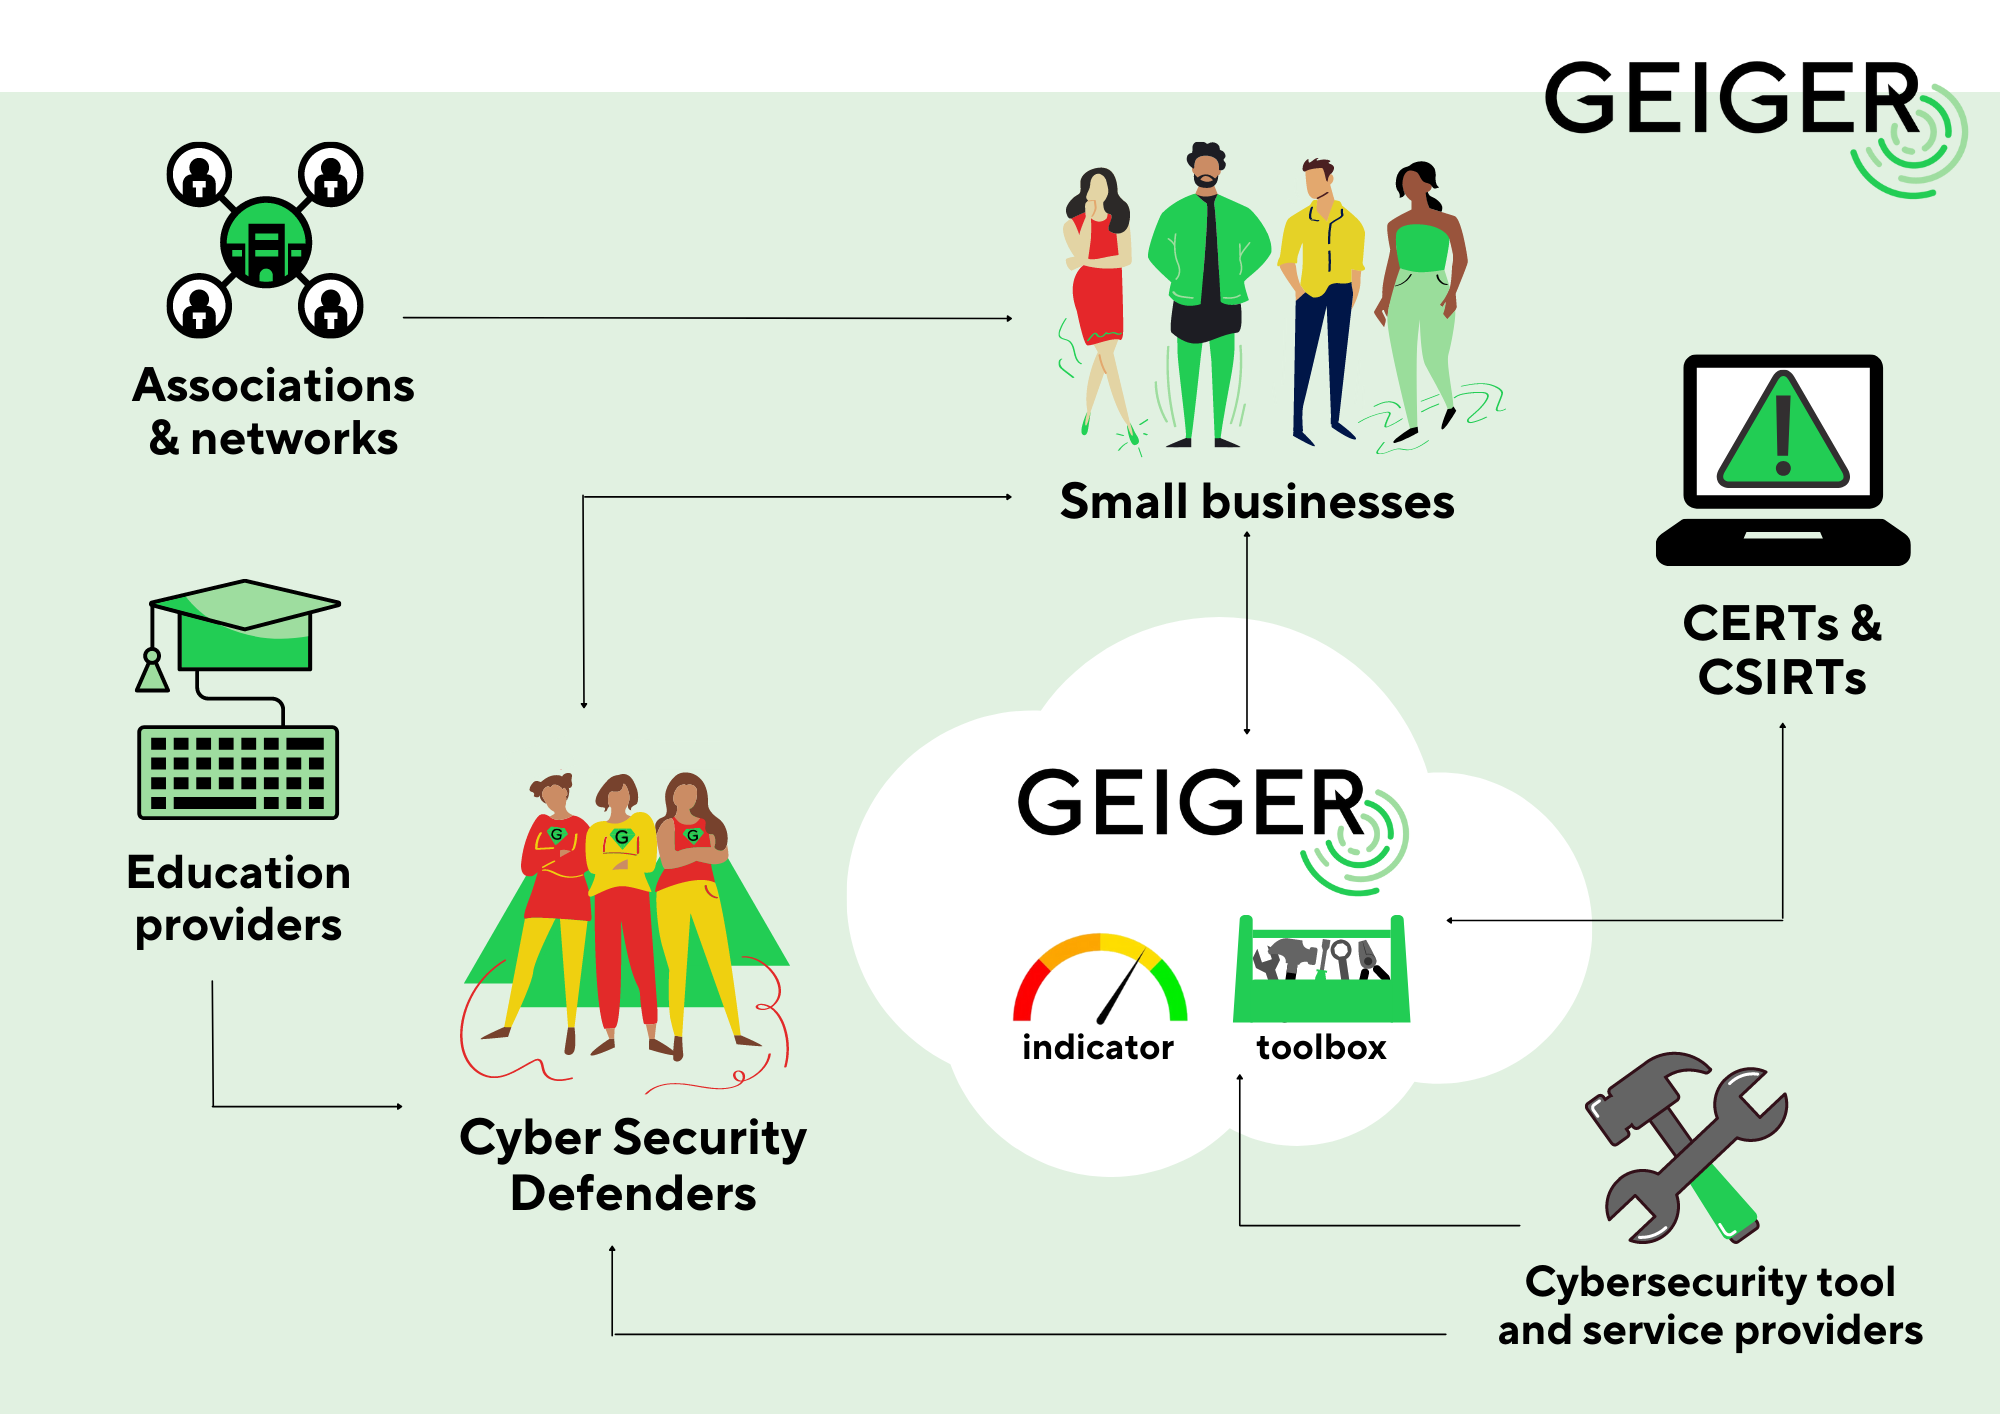 Kaspersky and the GEIGER project: IT security for small and micro enterprises requires training